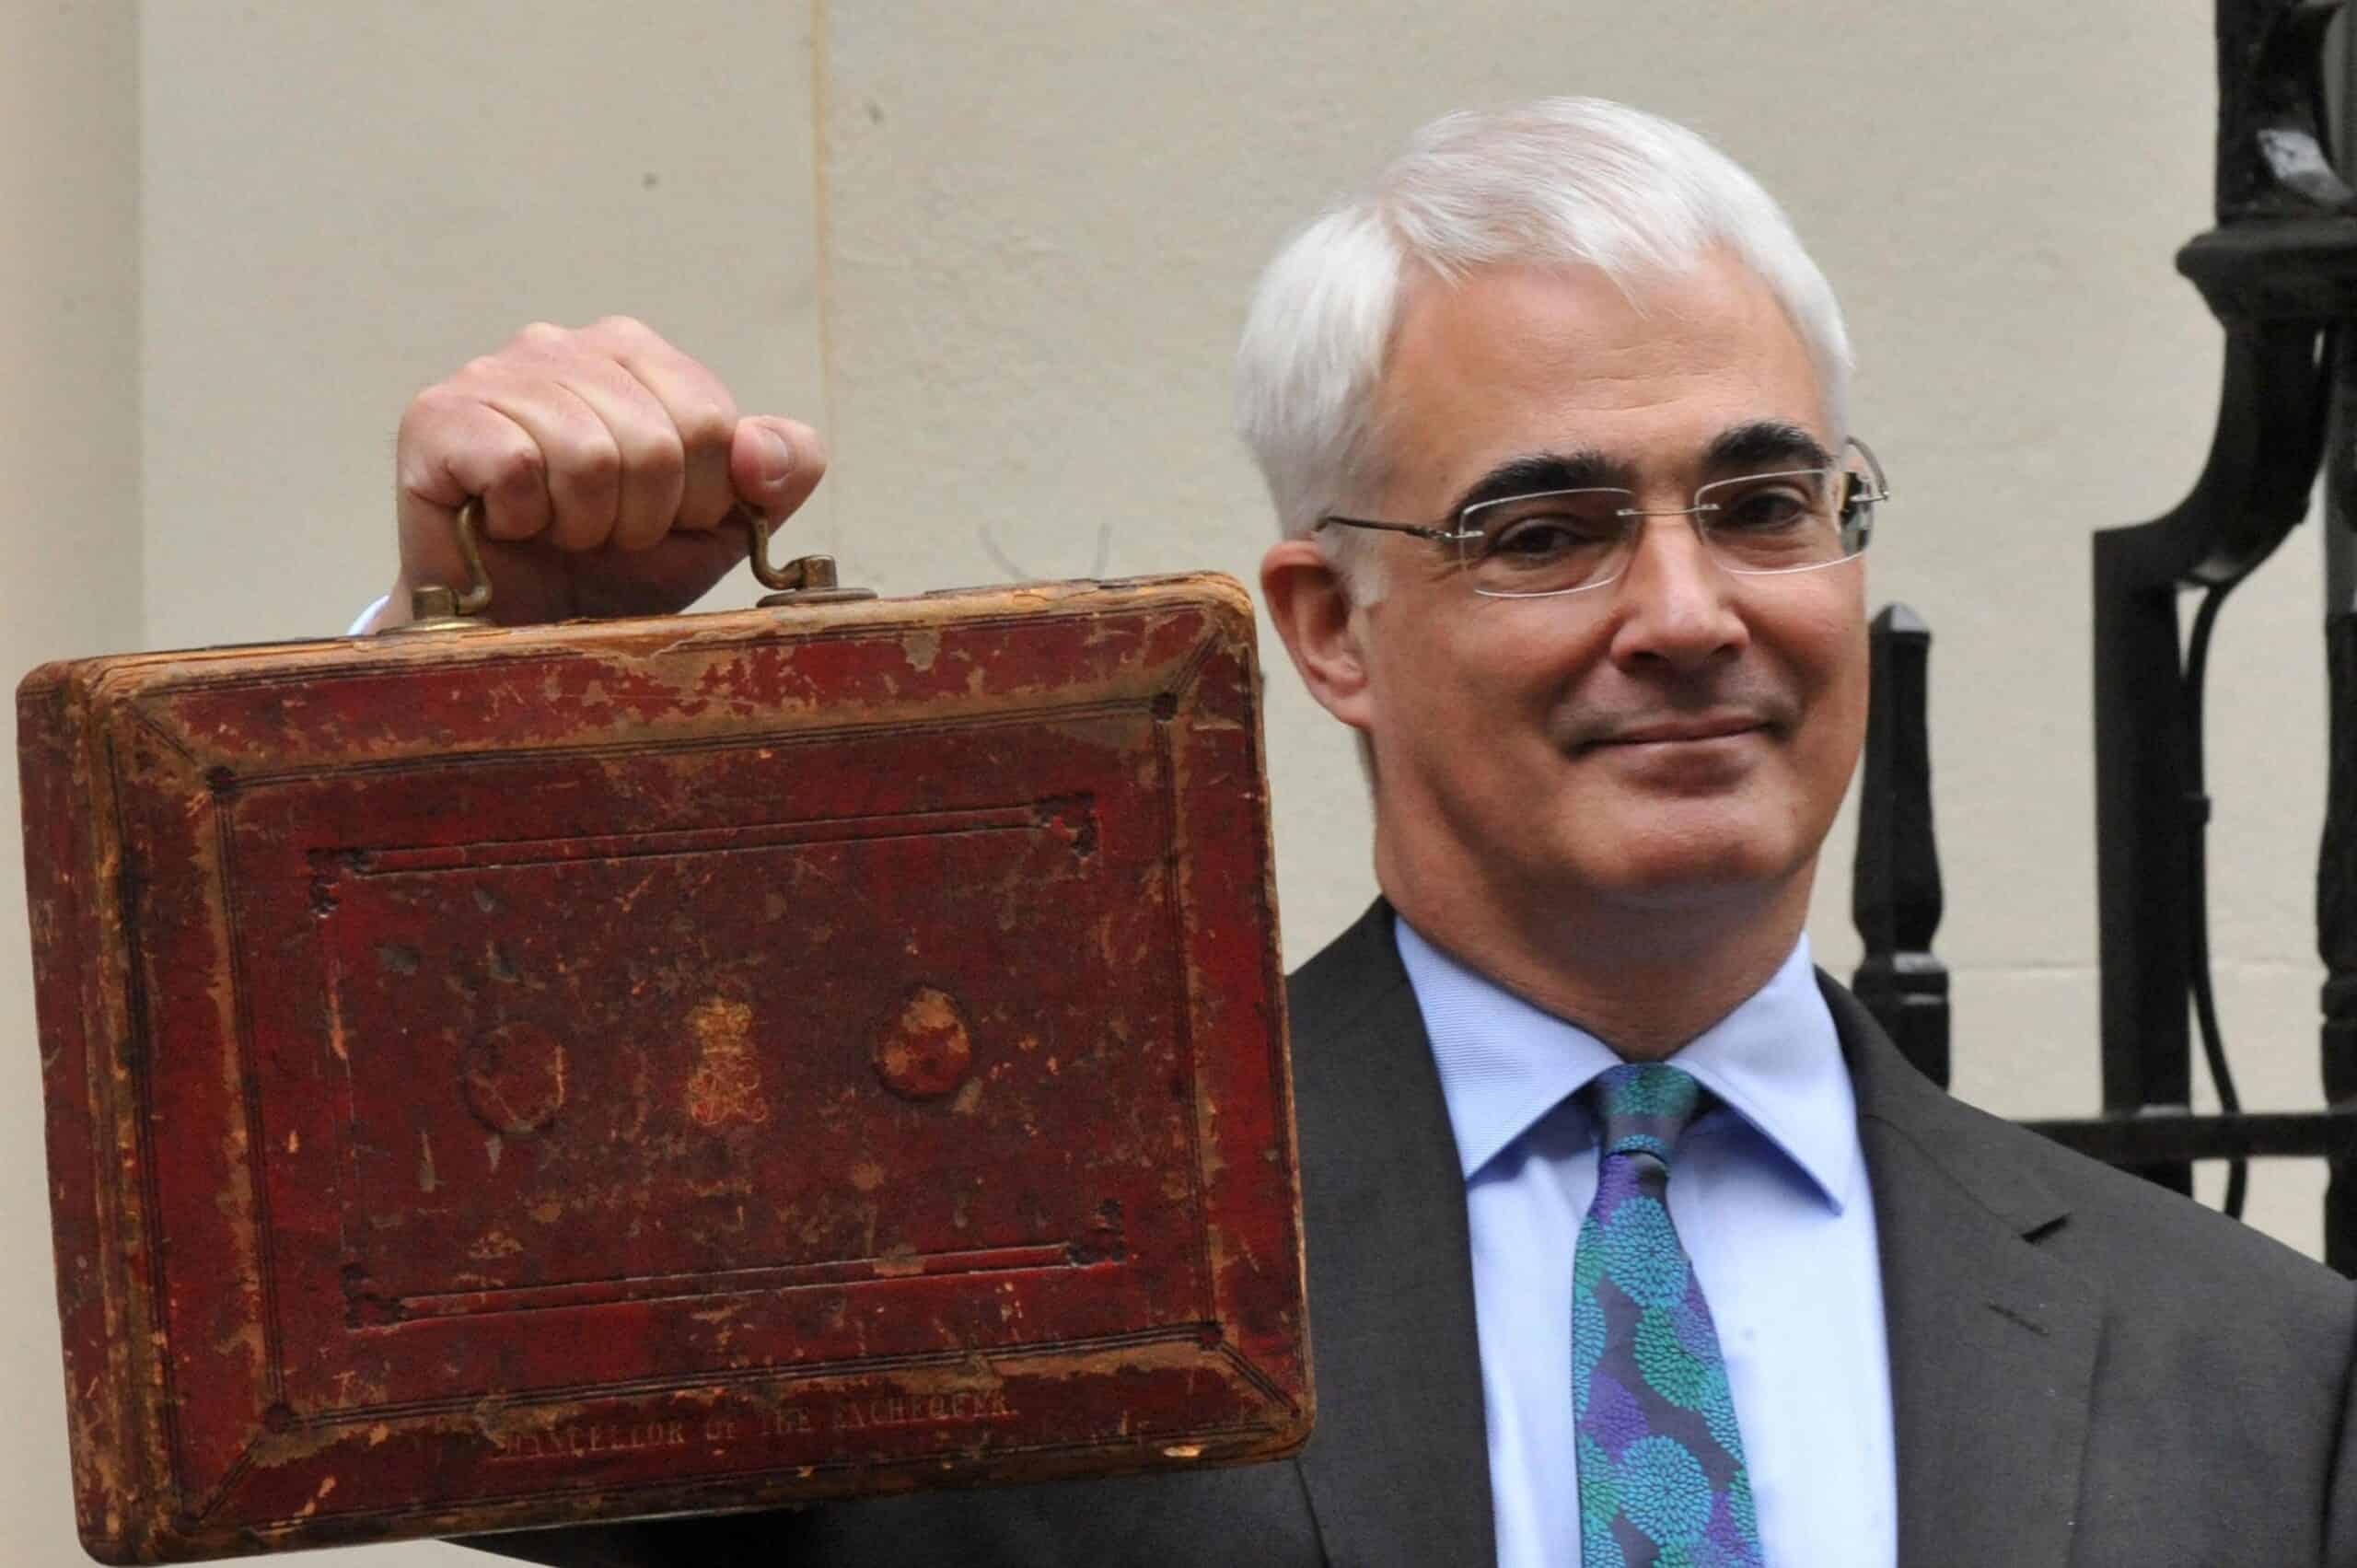 Alistair Darling obituary: The chancellor who led UK through financial crash